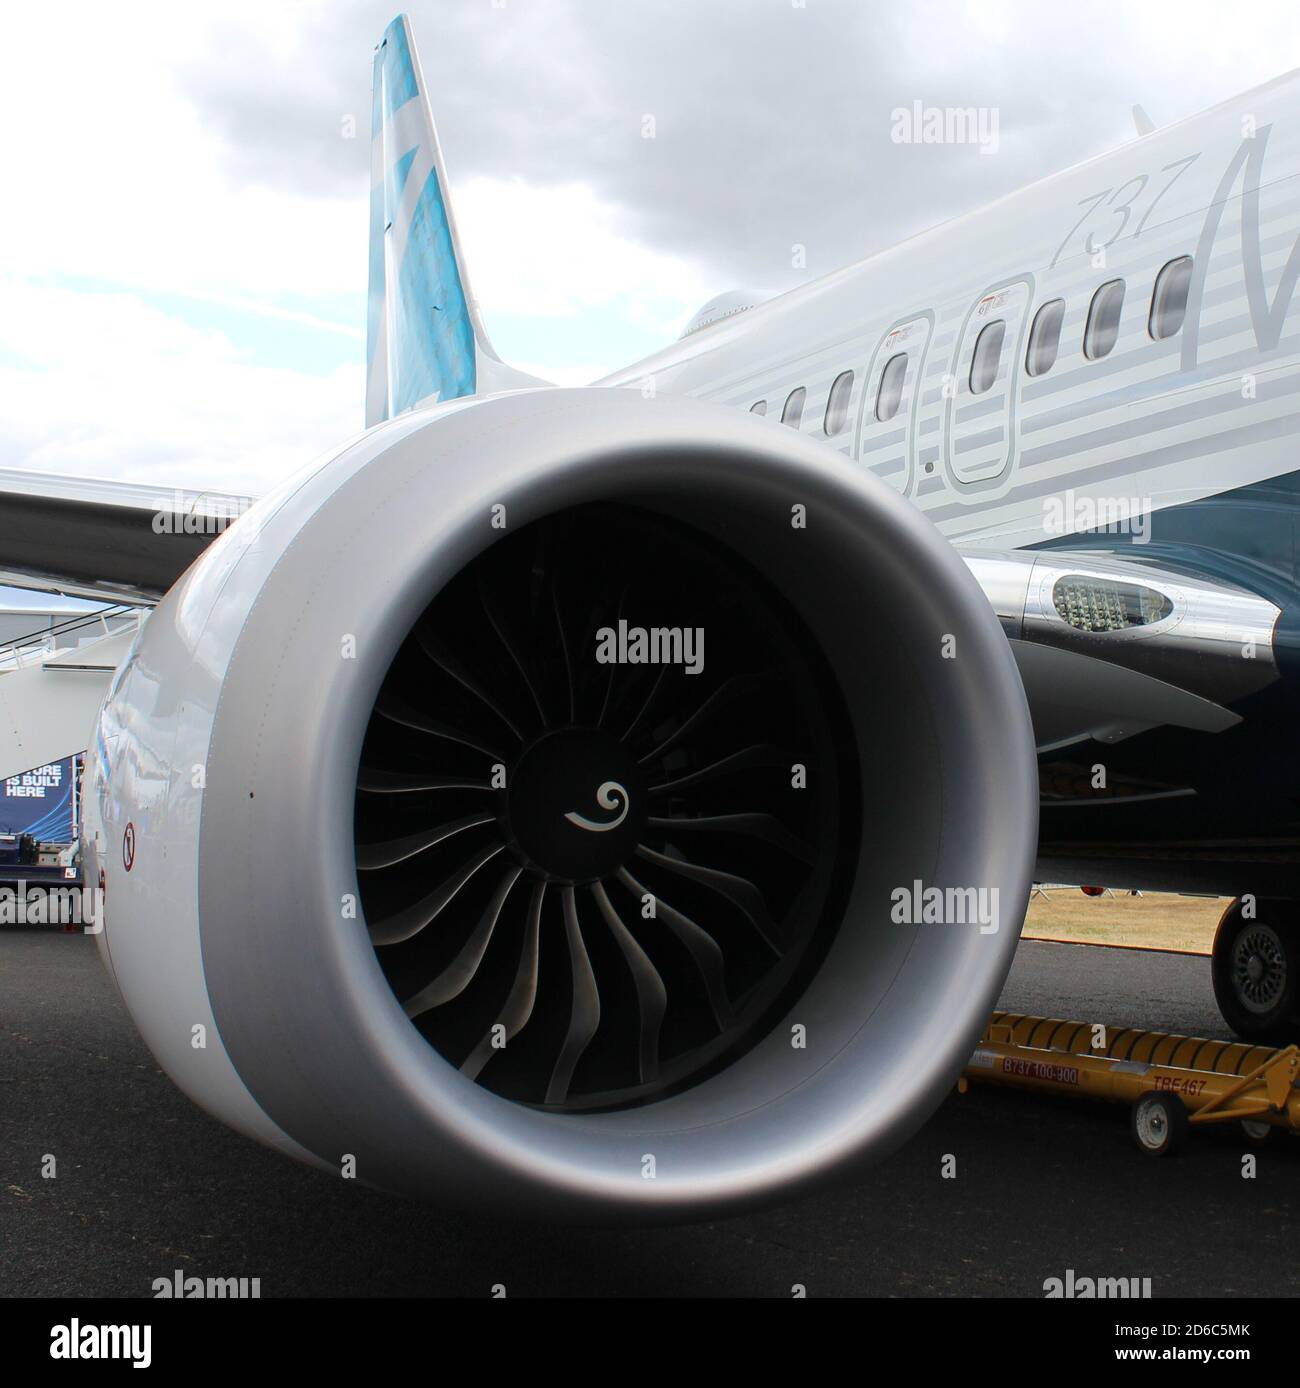 Boeing 737 Max (LEAP) Engine Stock Photo - Alamy